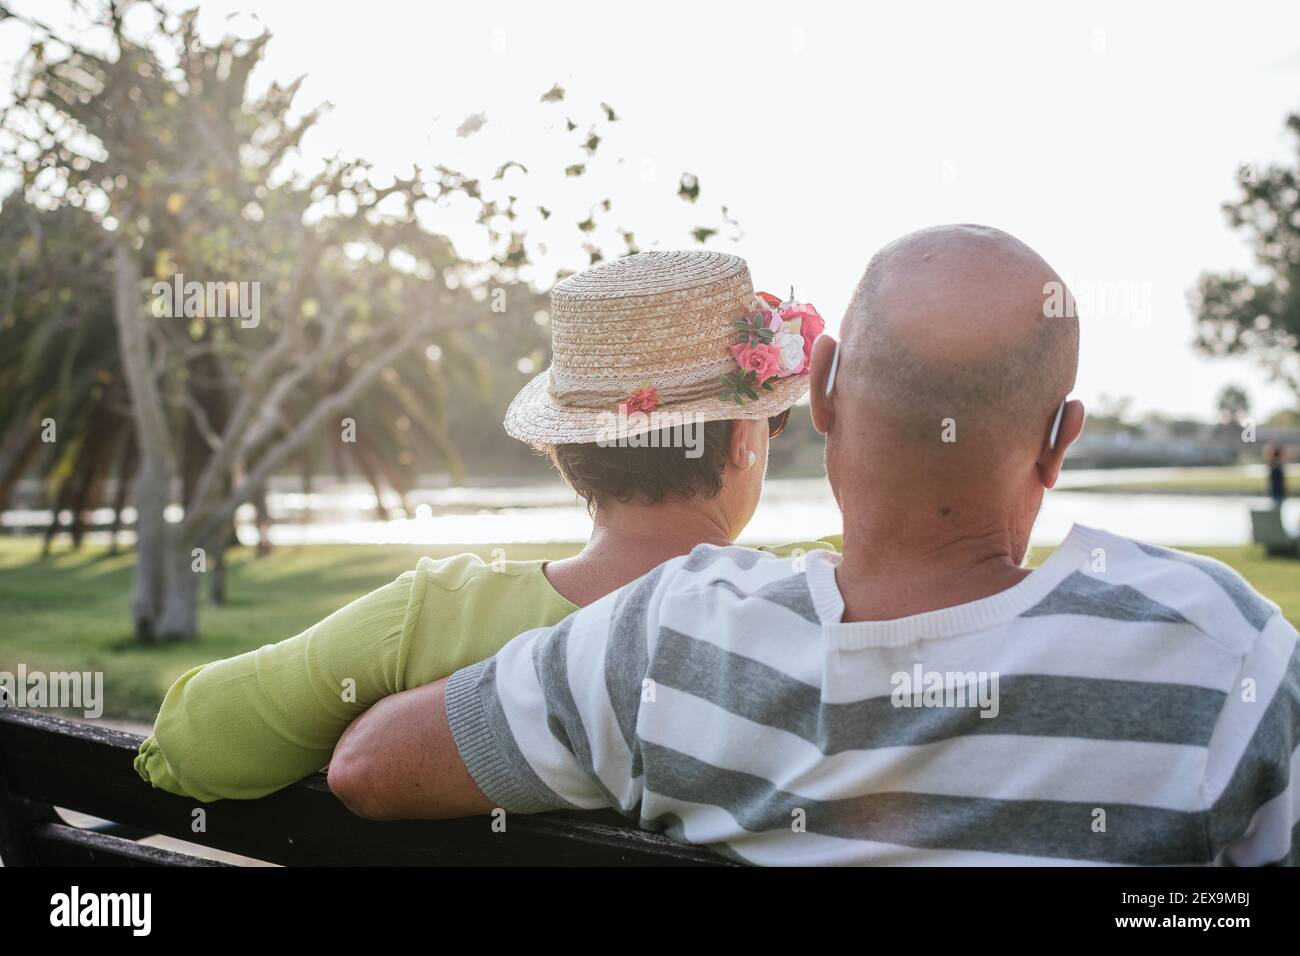 60 year old couple sitting on bench seen from behind Stock Photo